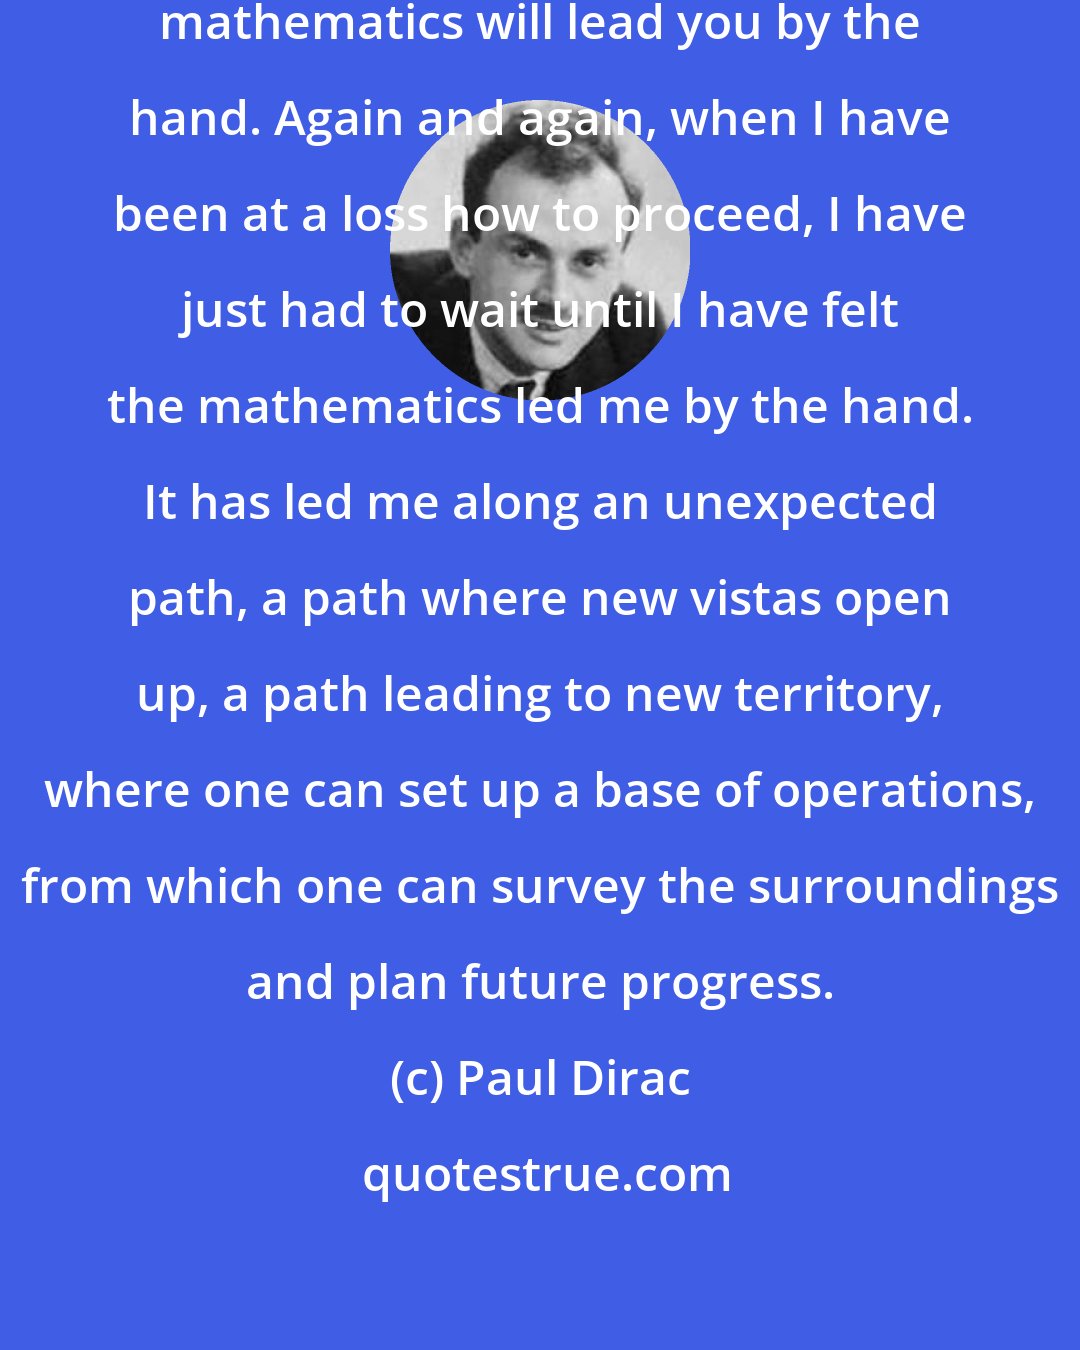 Paul Dirac: If you are receptive and humble, mathematics will lead you by the hand. Again and again, when I have been at a loss how to proceed, I have just had to wait until I have felt the mathematics led me by the hand. It has led me along an unexpected path, a path where new vistas open up, a path leading to new territory, where one can set up a base of operations, from which one can survey the surroundings and plan future progress.